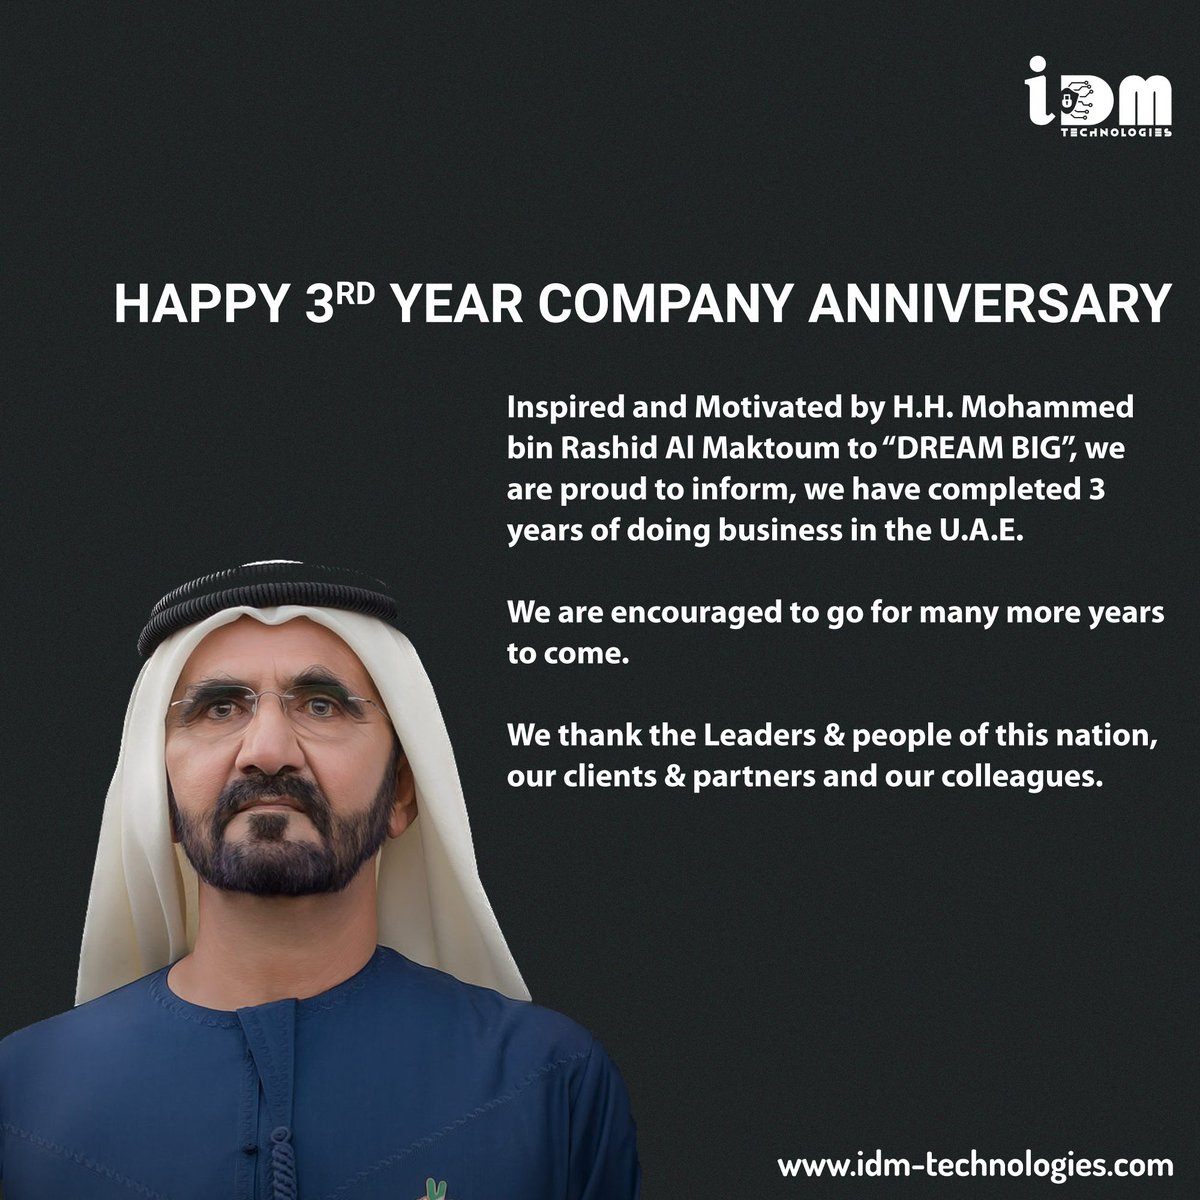 Happy 3rd Anniversary to our company. May we keep on shining and glamming brighter than the past year.

#IDMTechnologies #companyanniversary #anniversary #thankyou #years #workcelebration #business #companycelebration #journey #companybirthday #hardwork